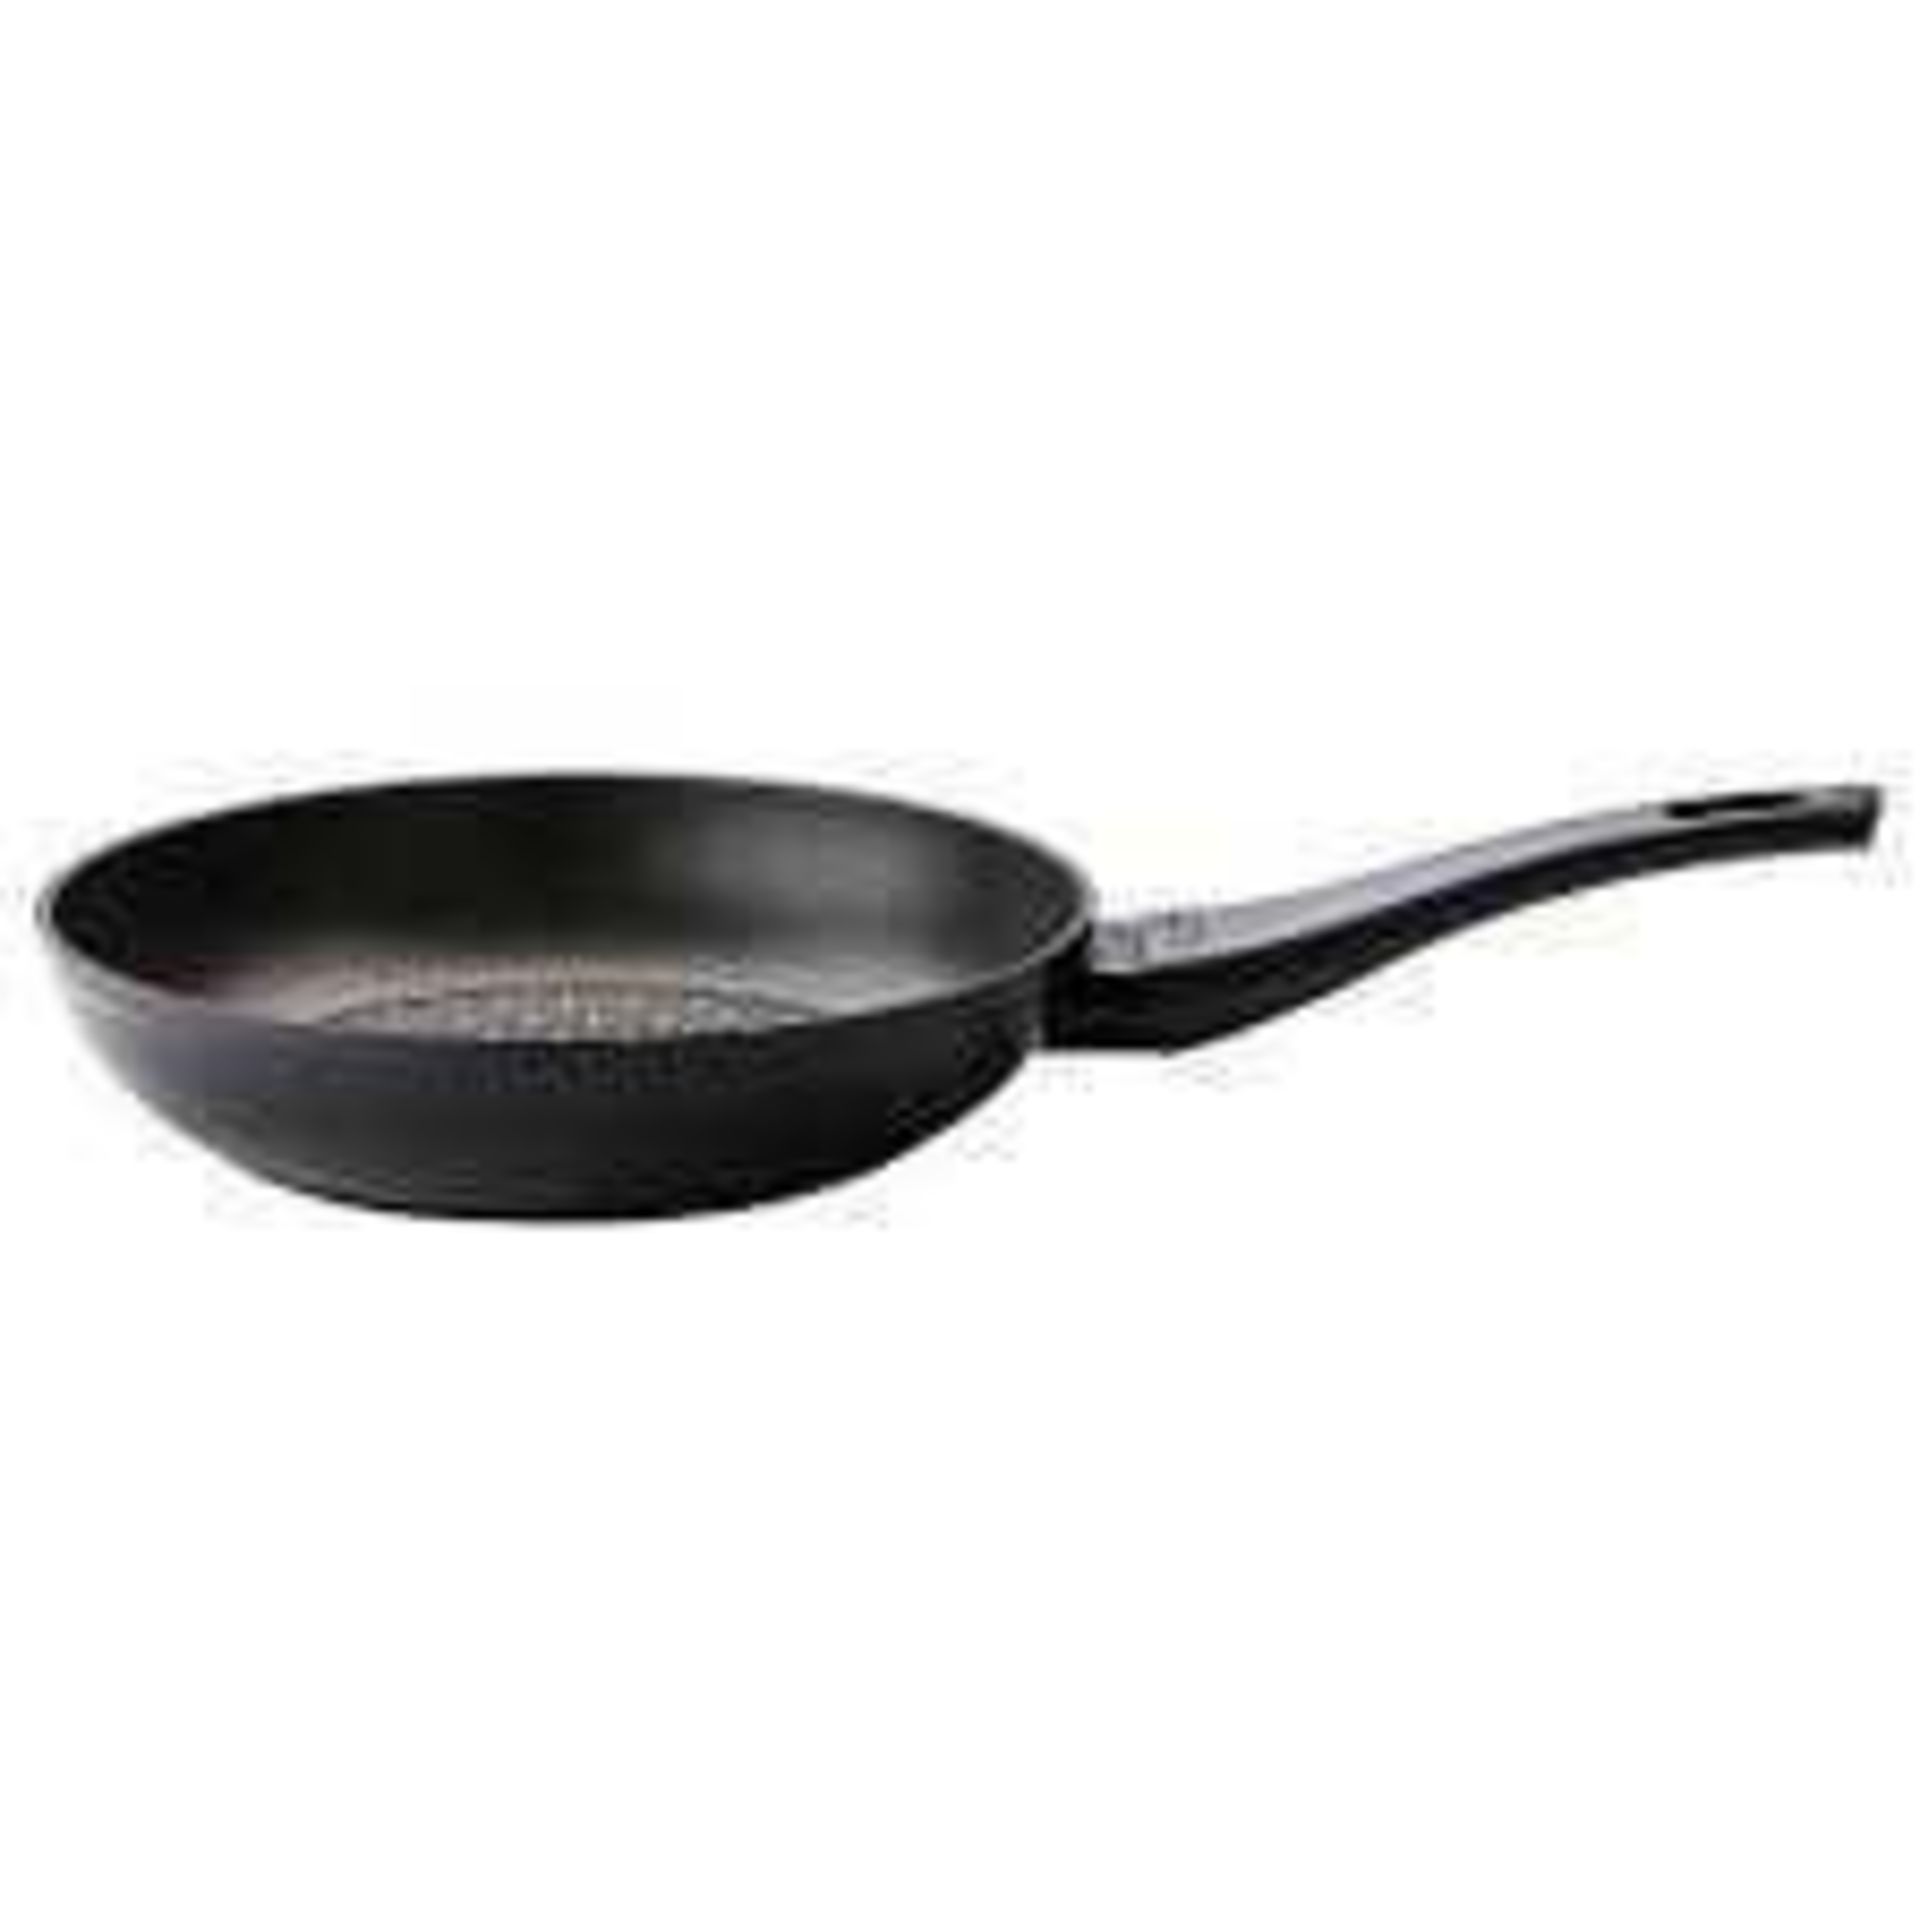 RRP £135 Lots To Contain 3 Assorted Non Stick Cermaic Coated Frying Pan S By Prestige And Eazi Glide - Image 2 of 2